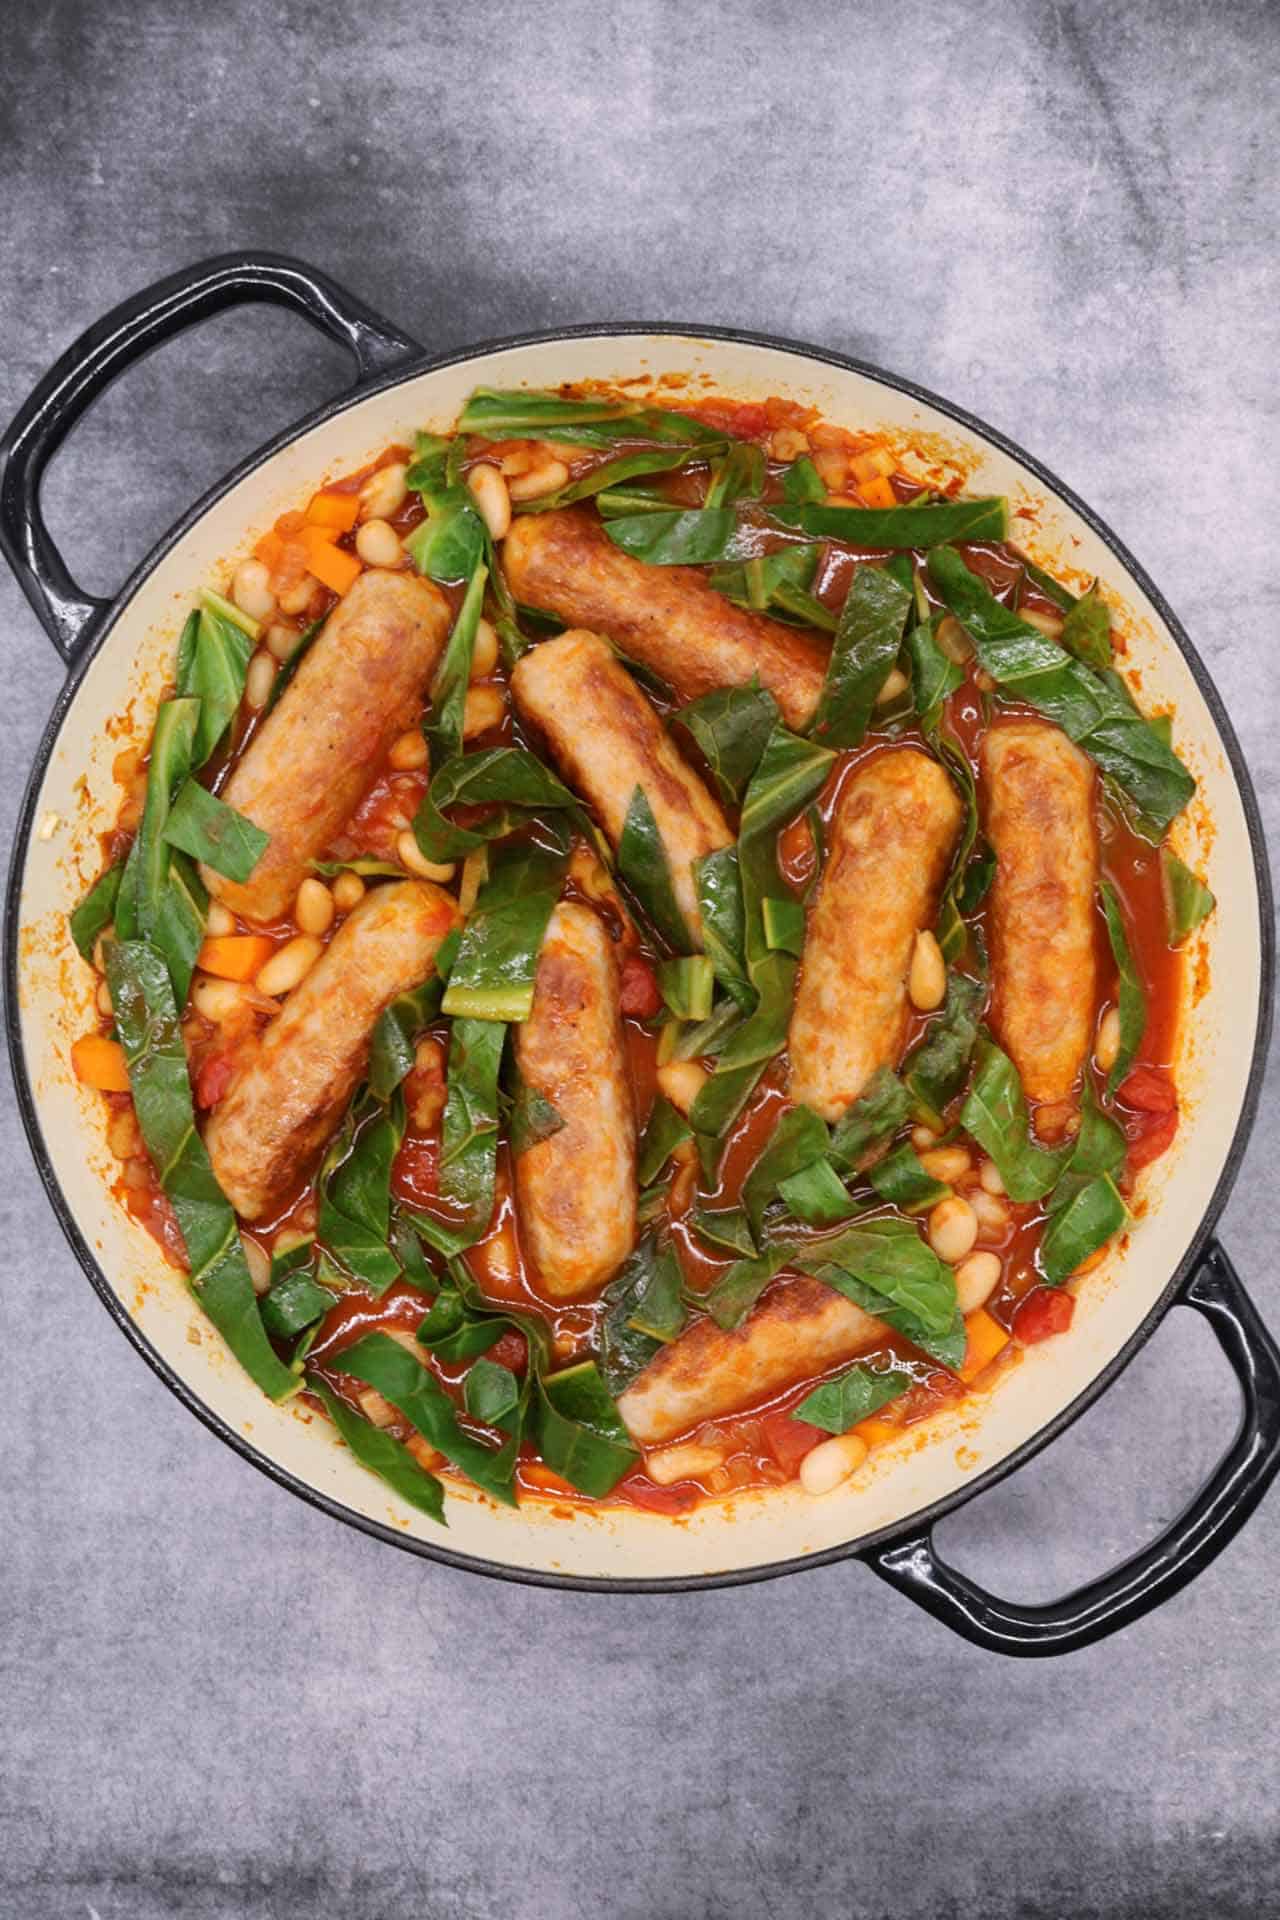 Sausage and cannellini bean casserole in large round casserole